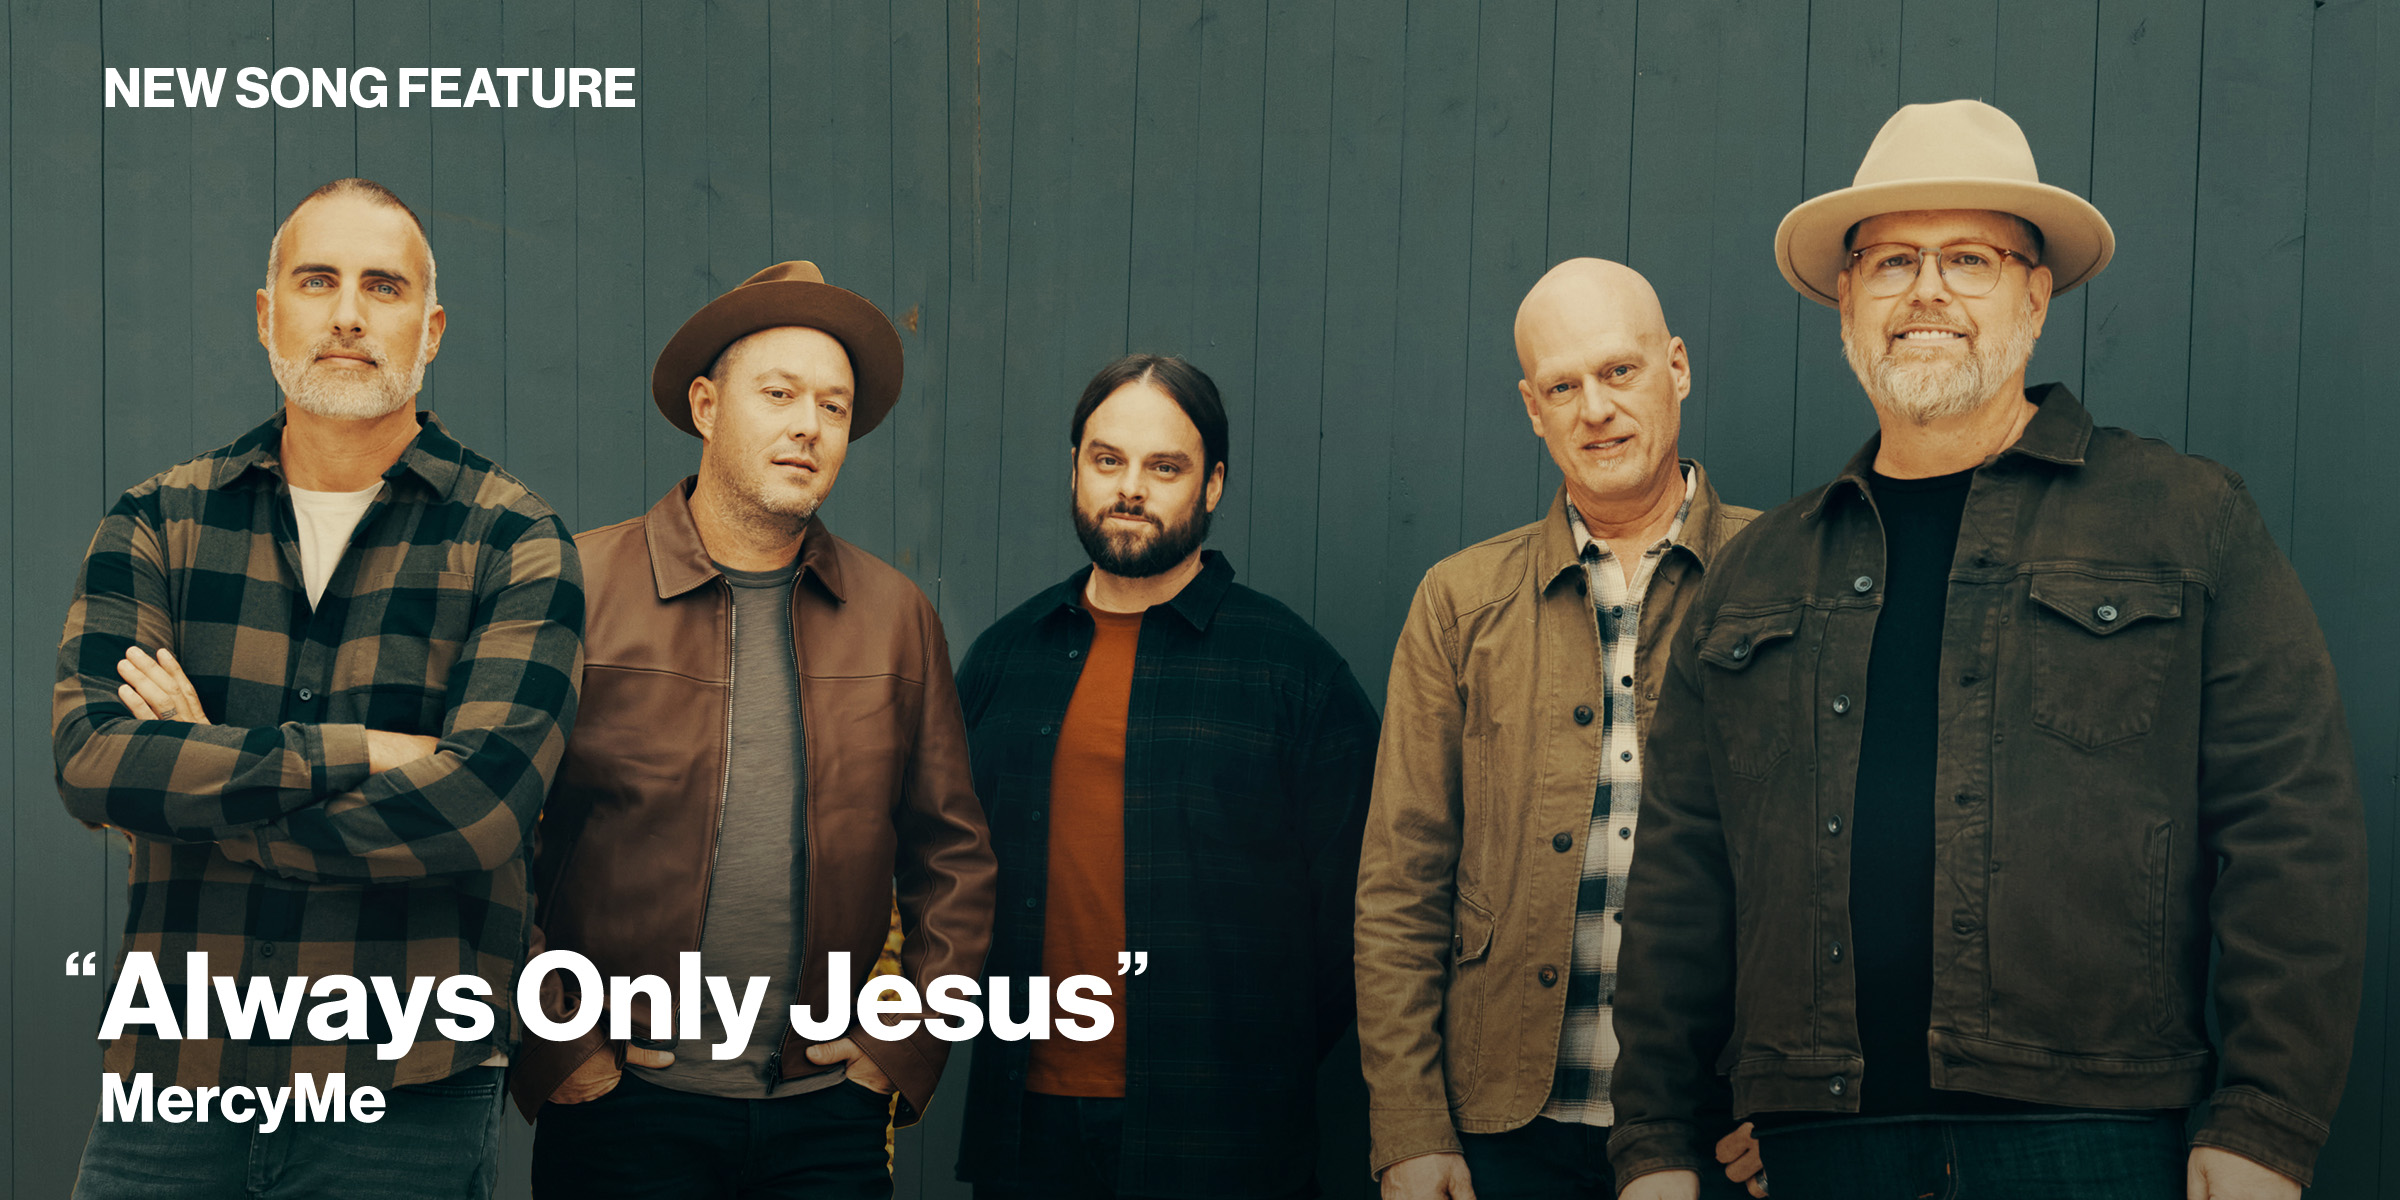 New Song Feature: "Always Only Jesus" MercyMe